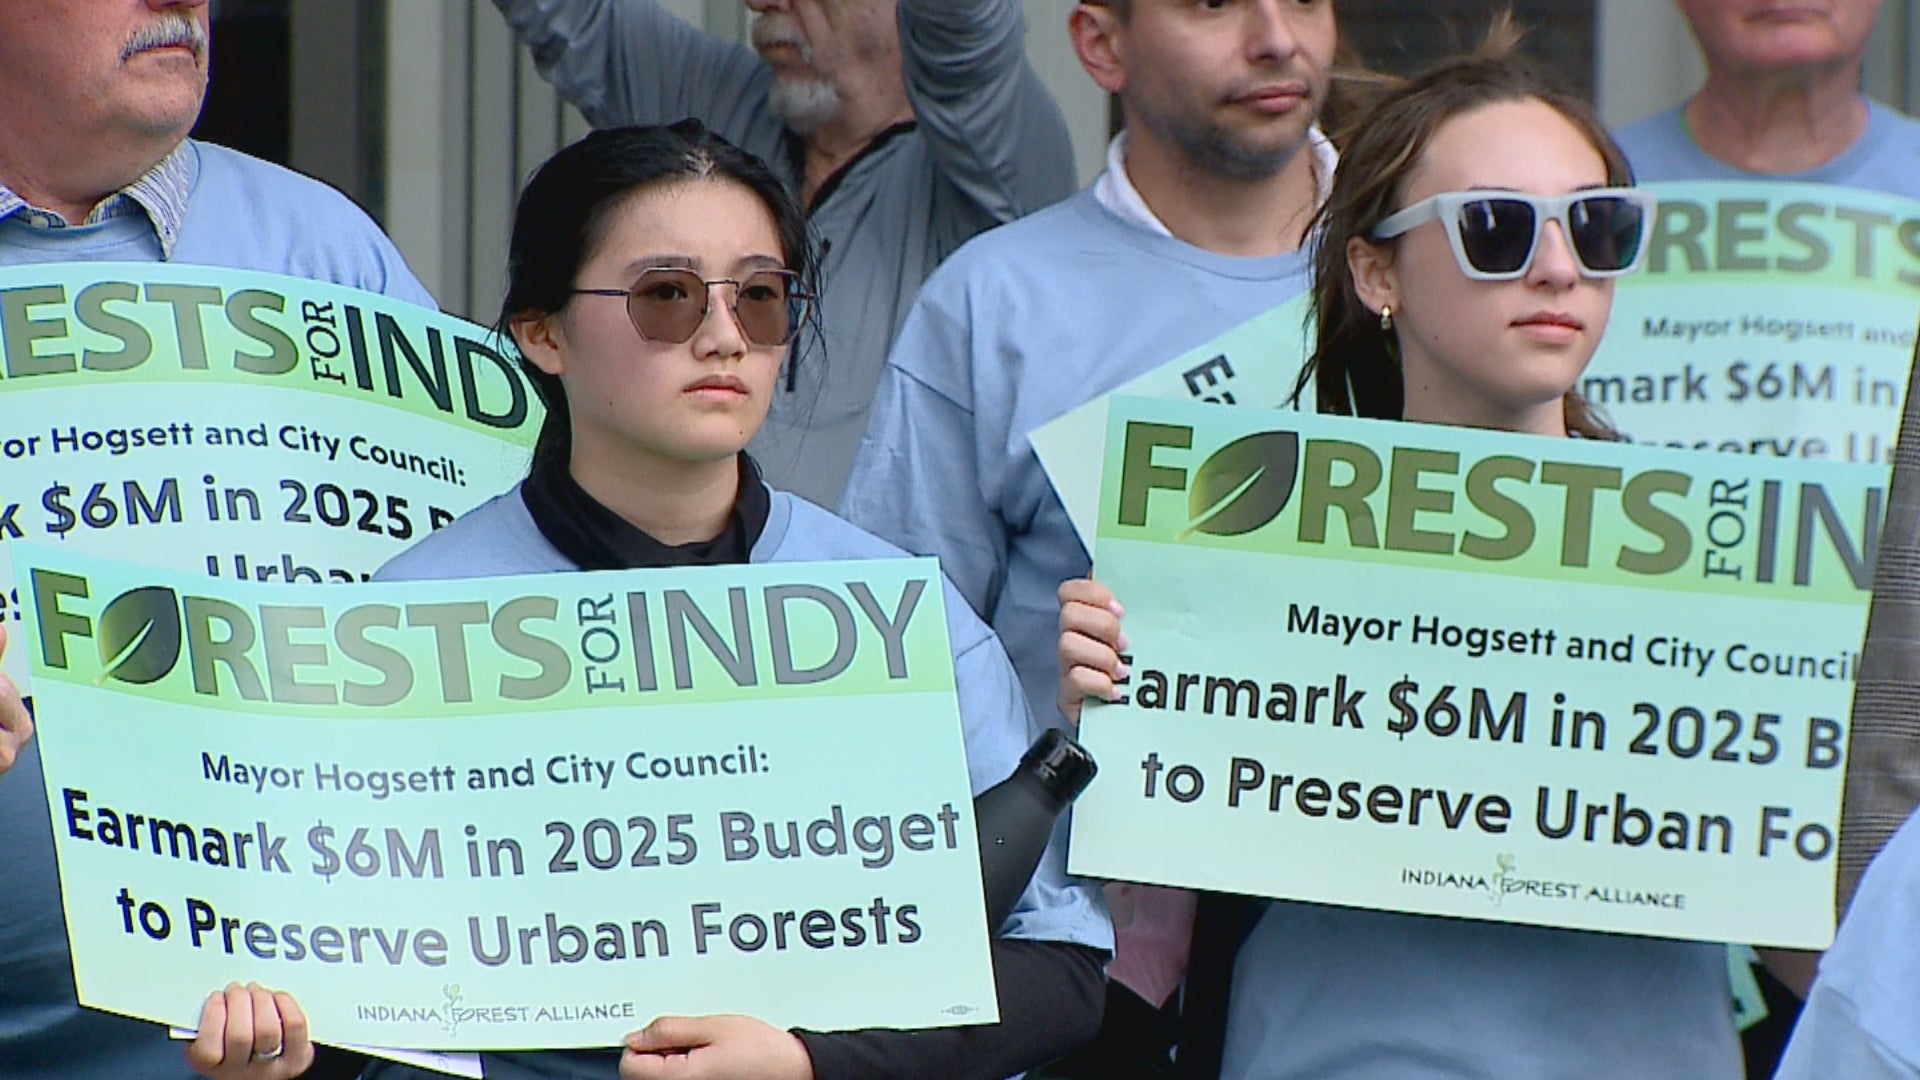 Indiana Forest Alliance rallies to protect urban forests